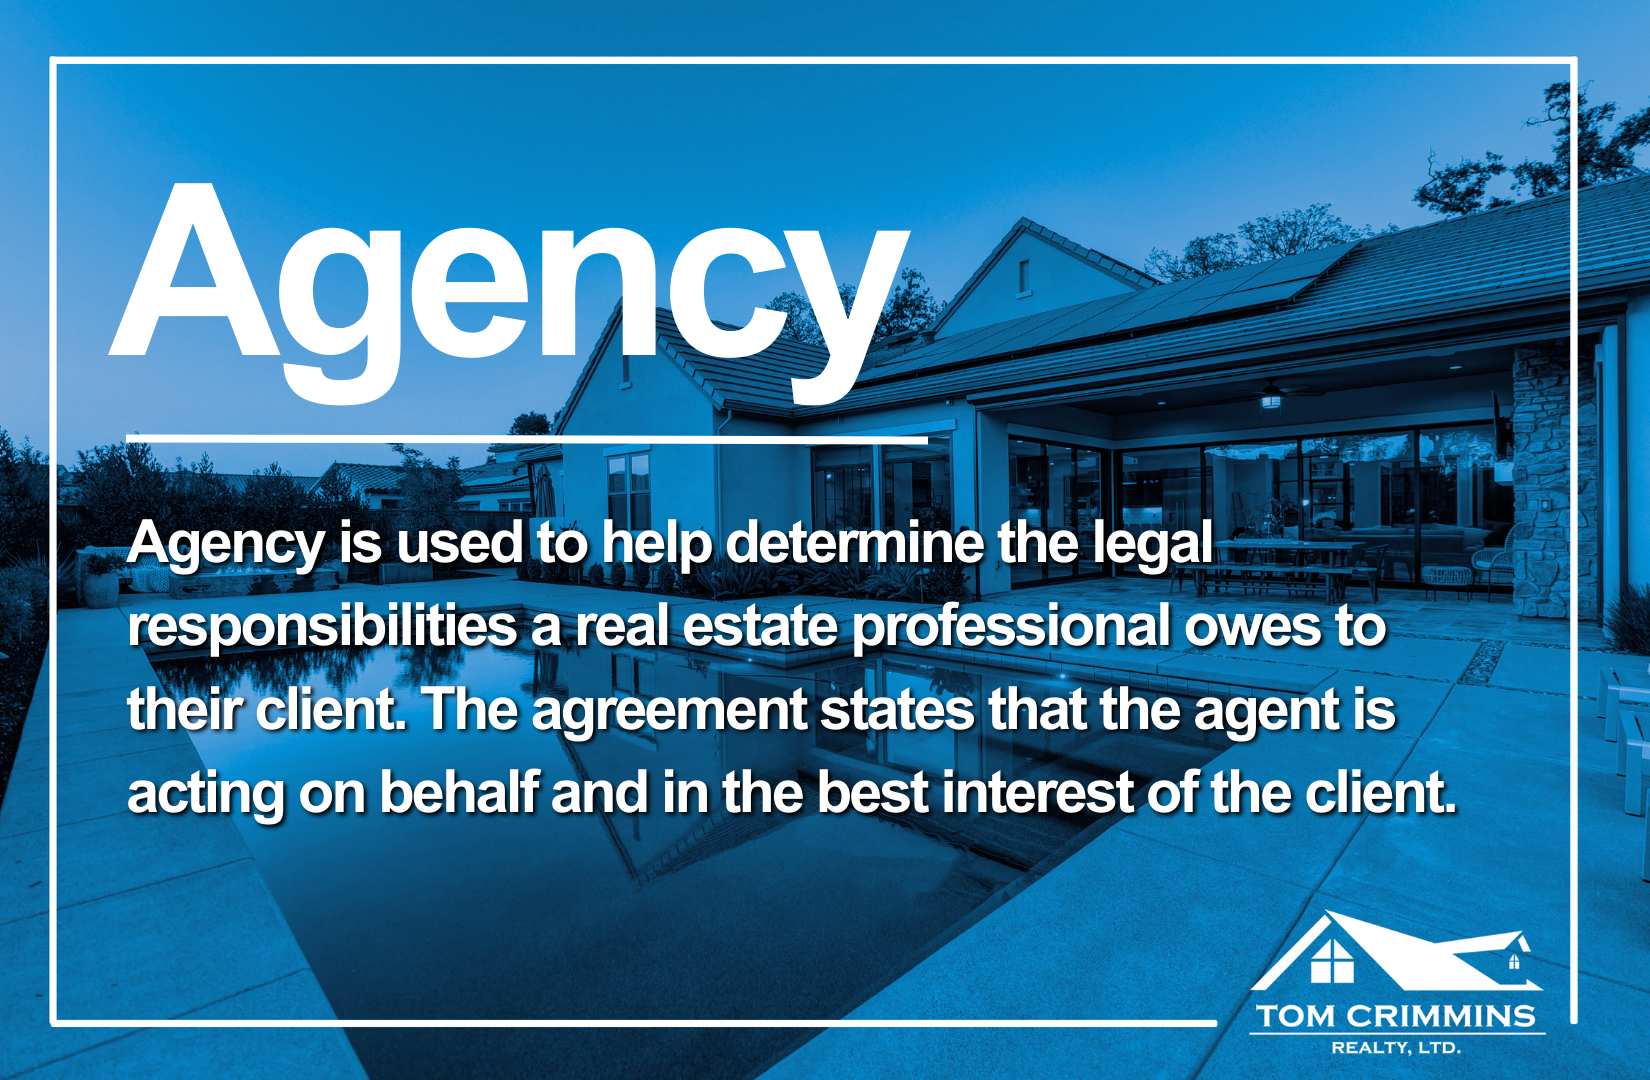 Word of the Day: Agency